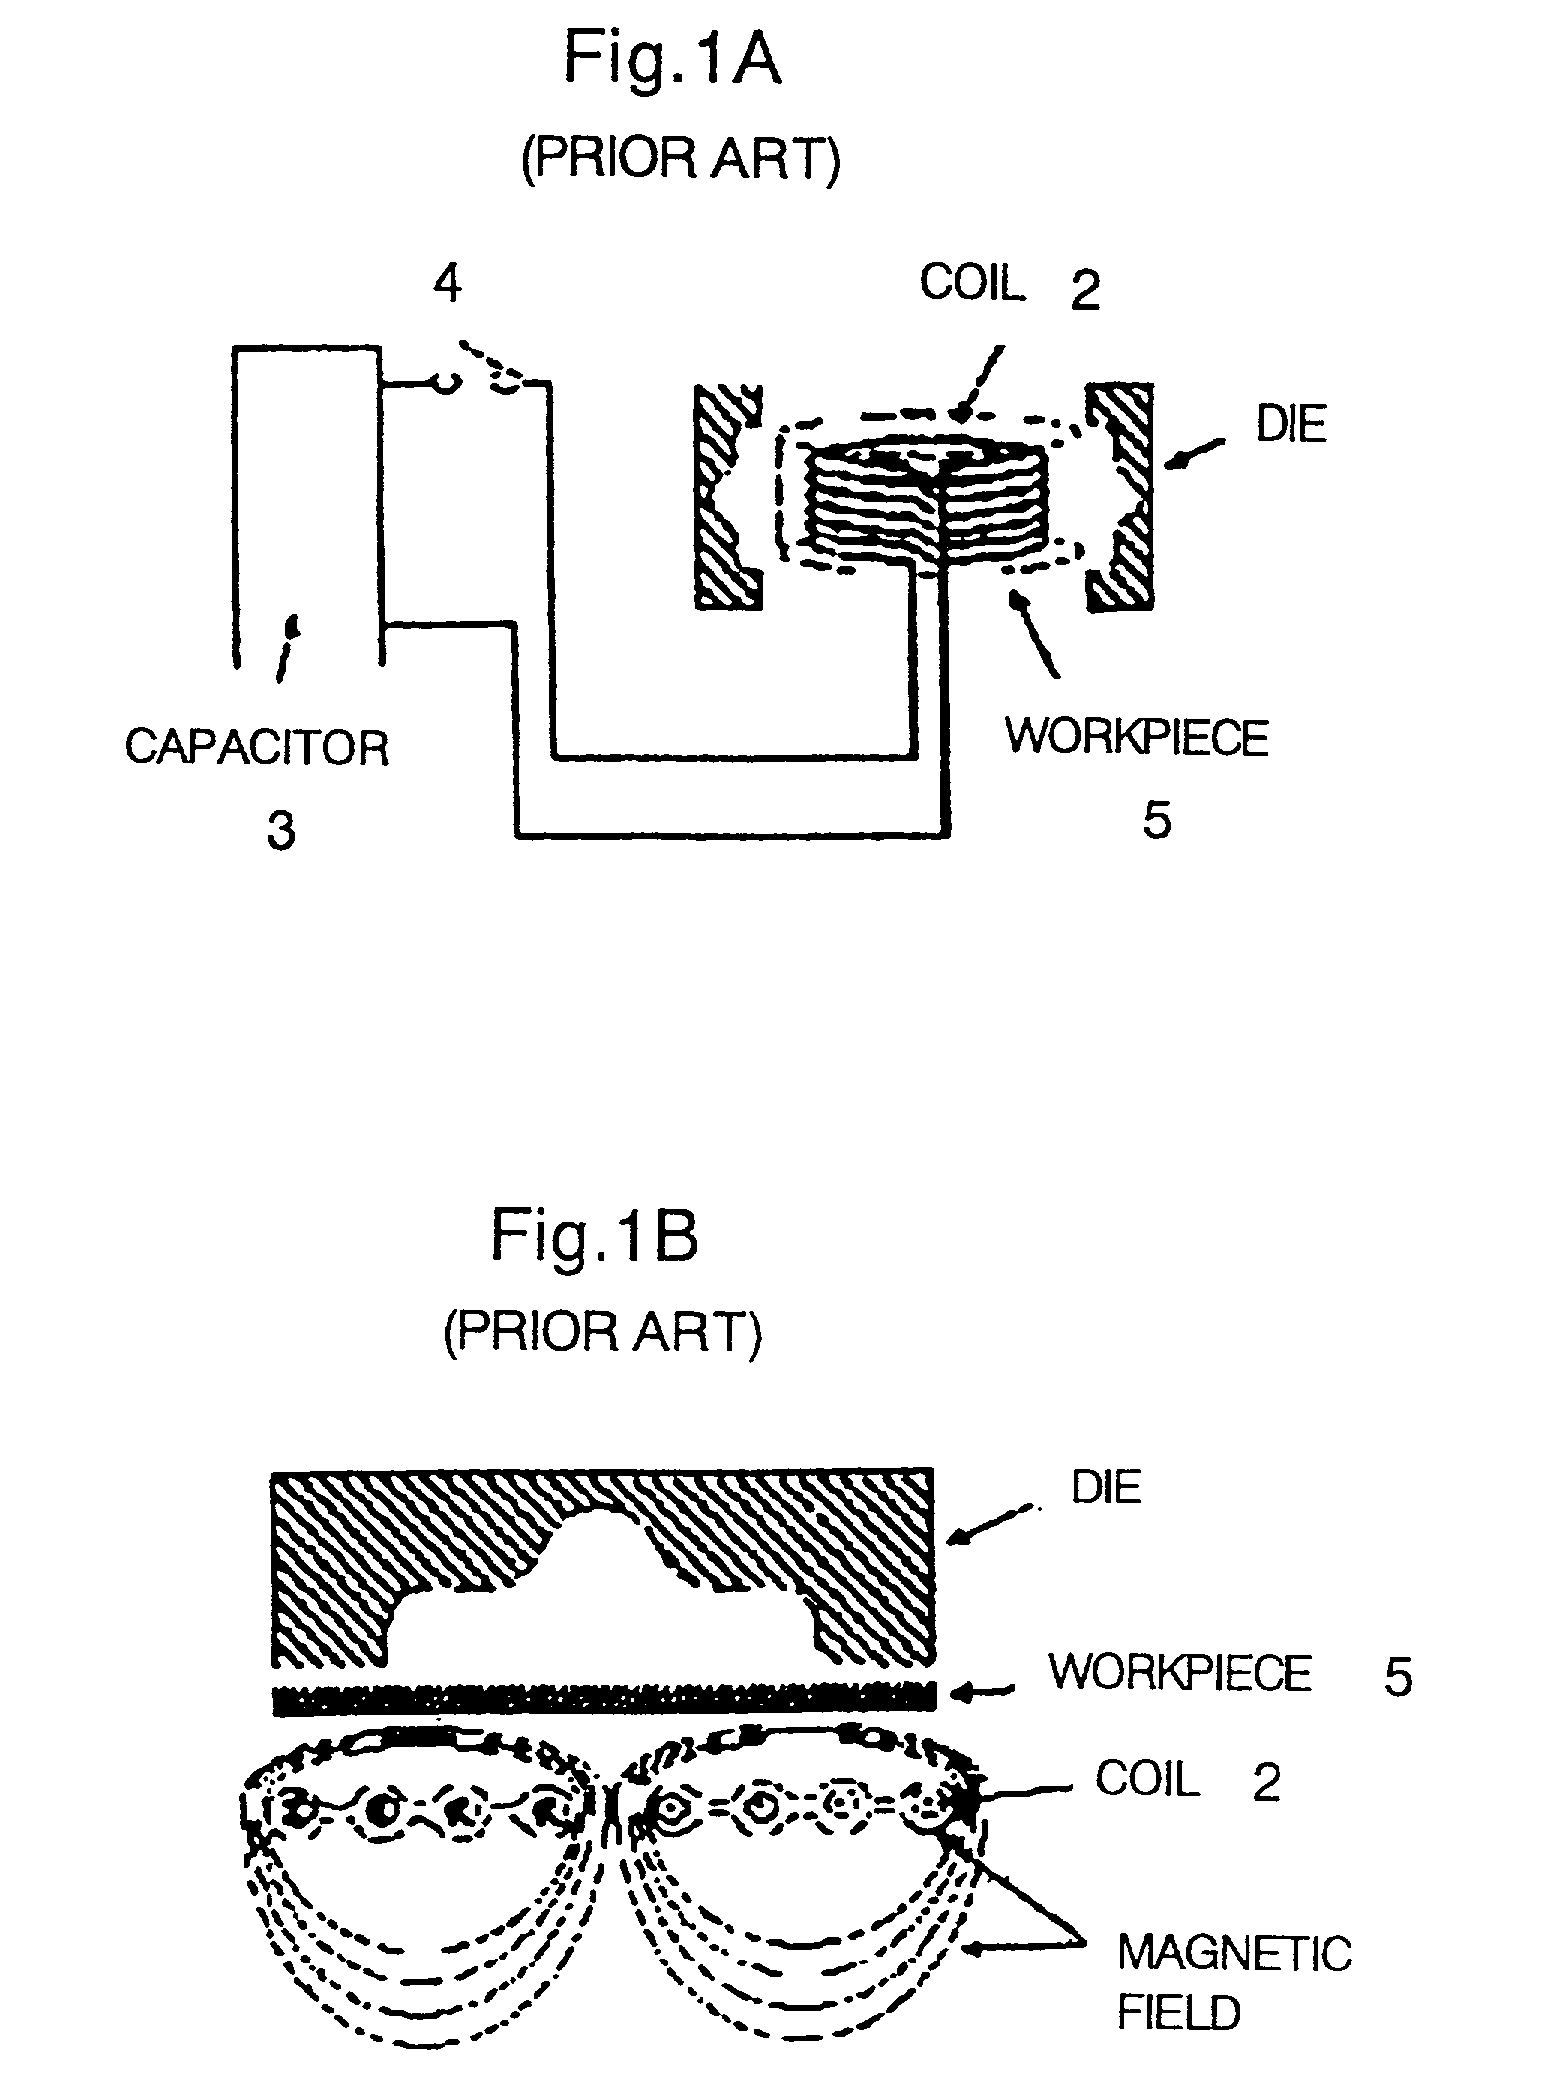 Electromagnetic connecting device for high voltage and large current